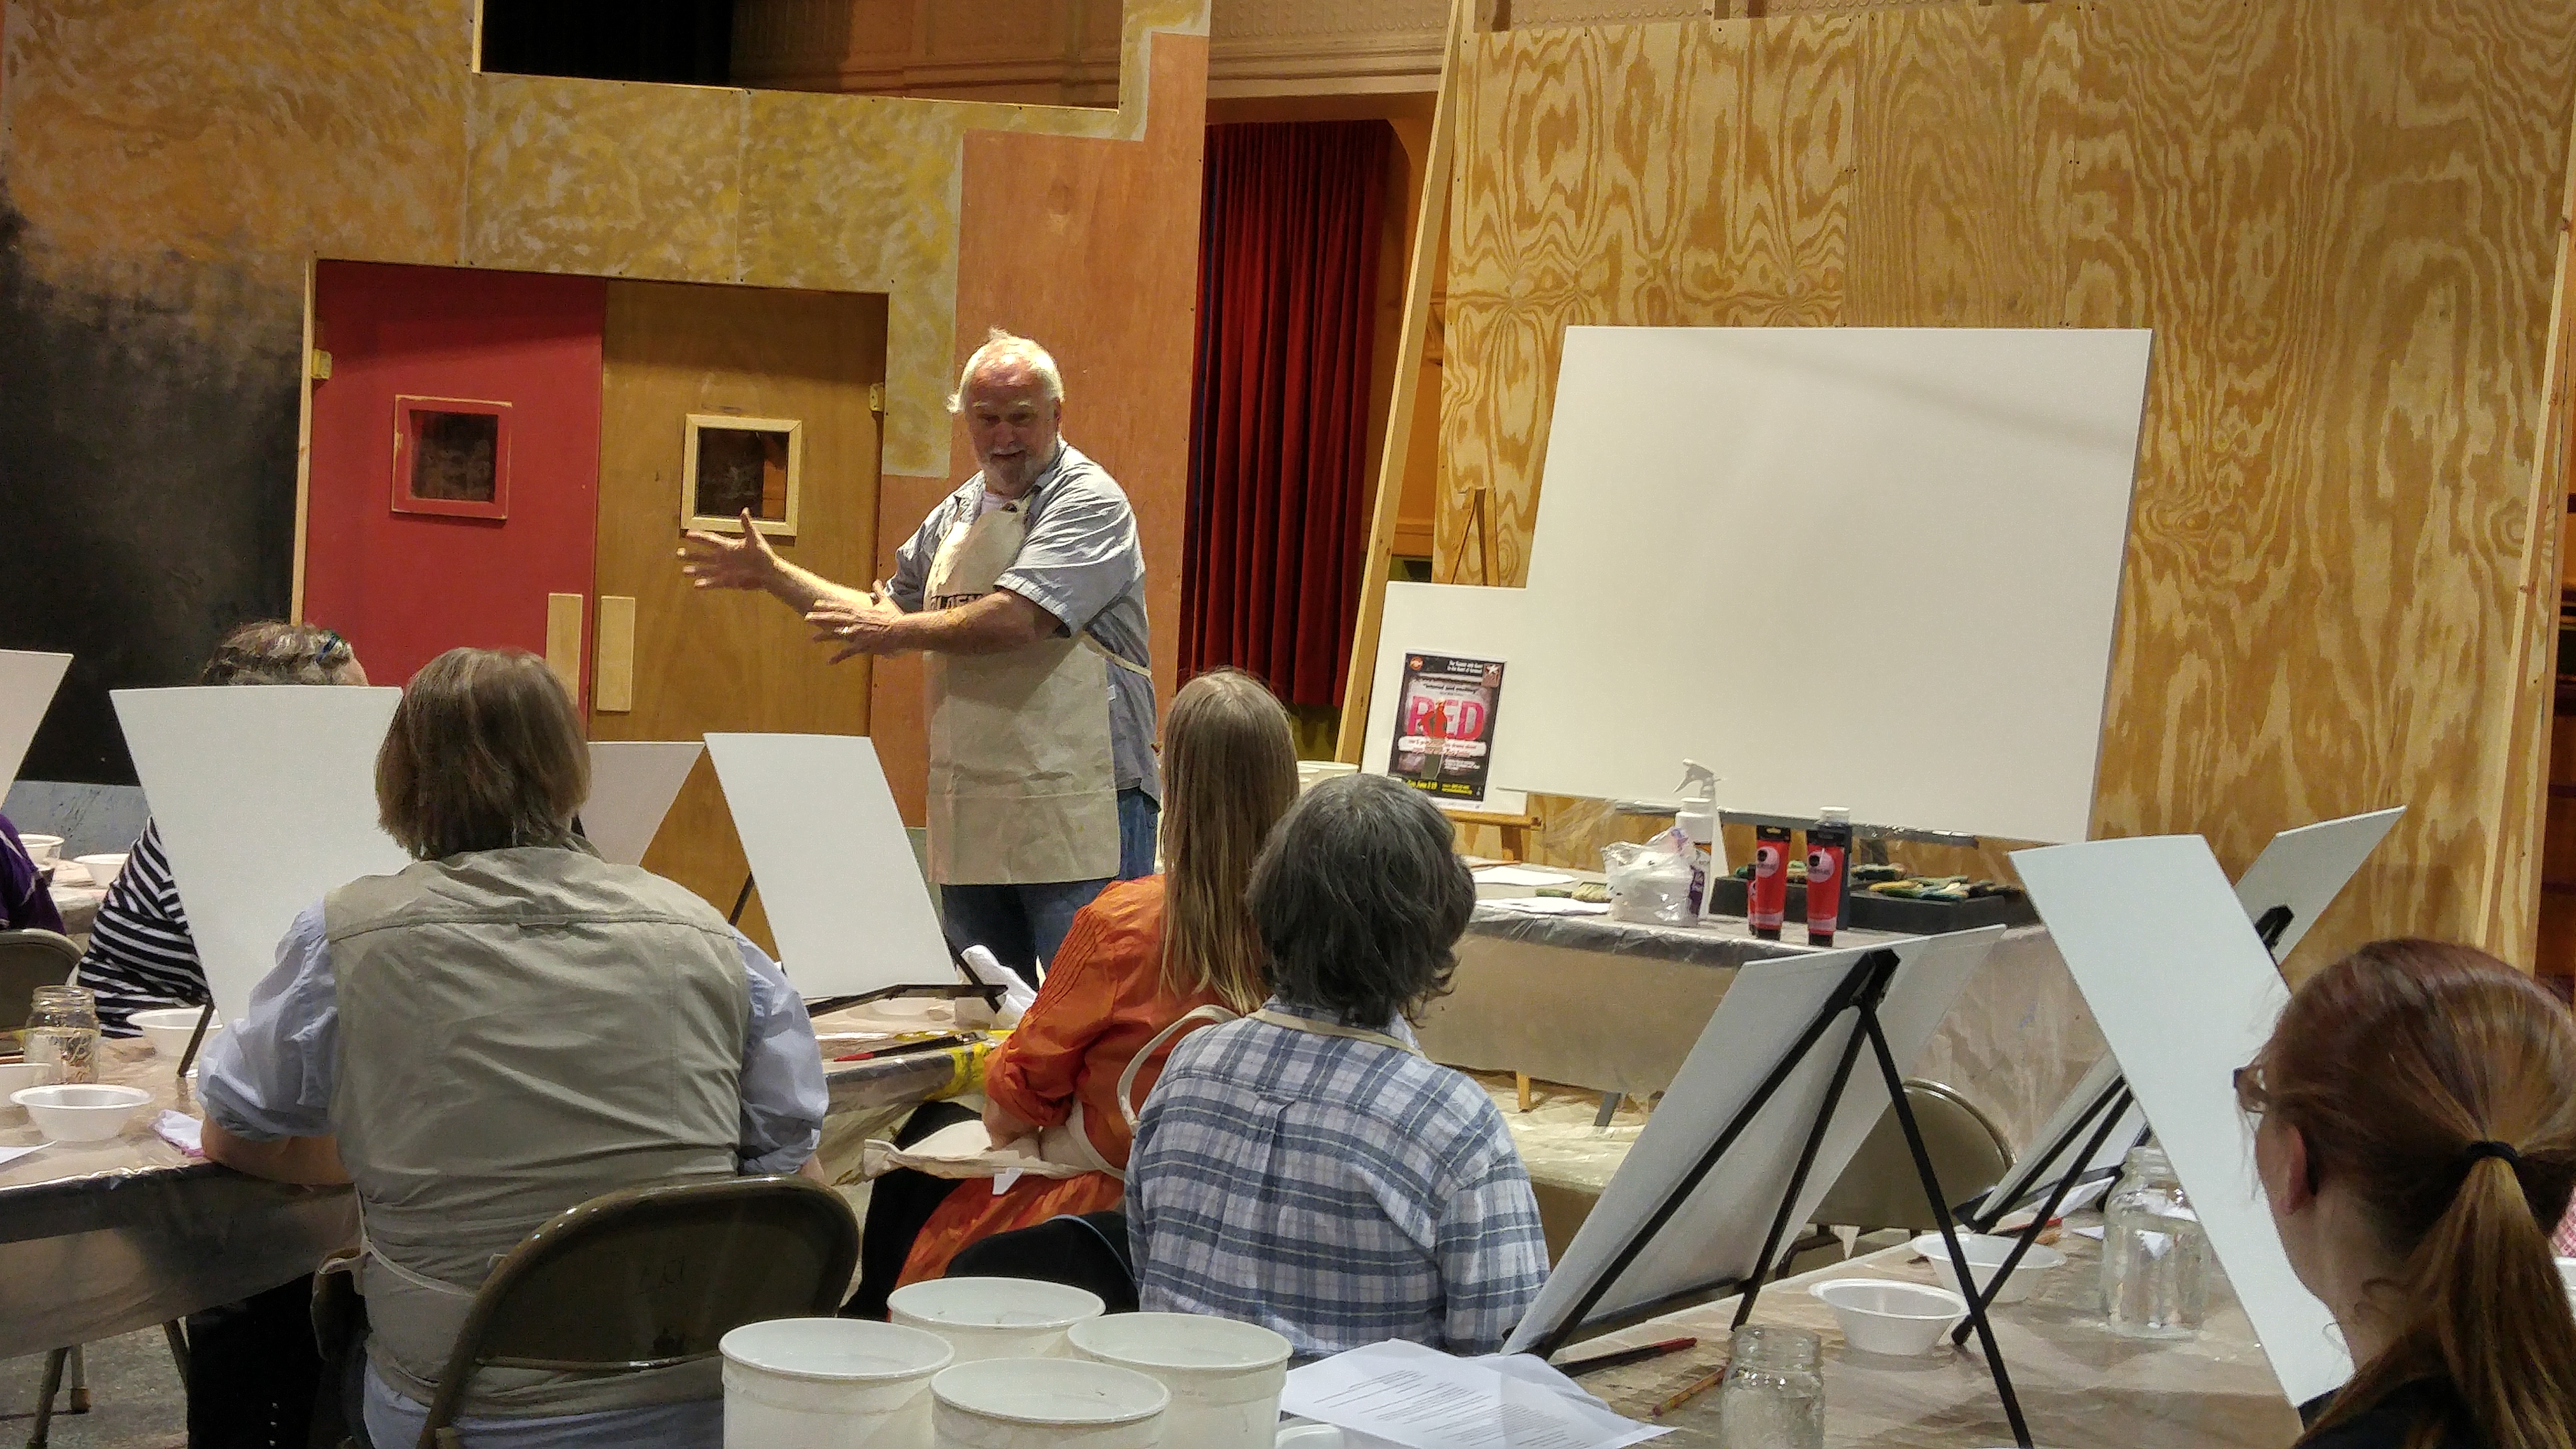 Arthur Zorn instructing at LNT's first annual Paint & Sip